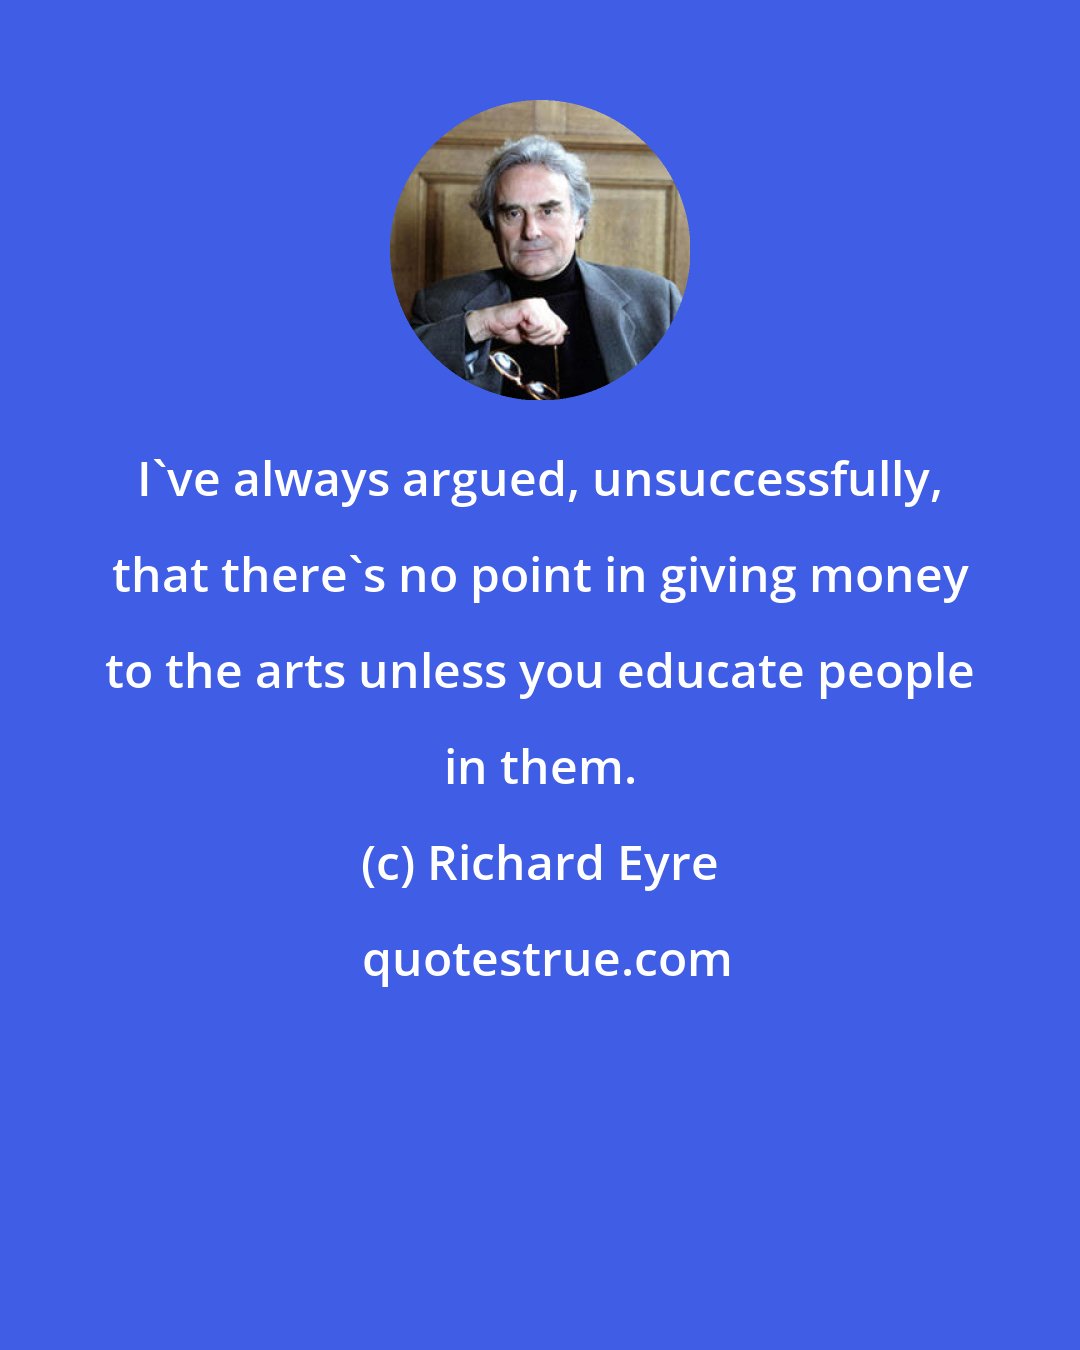 Richard Eyre: I've always argued, unsuccessfully, that there's no point in giving money to the arts unless you educate people in them.